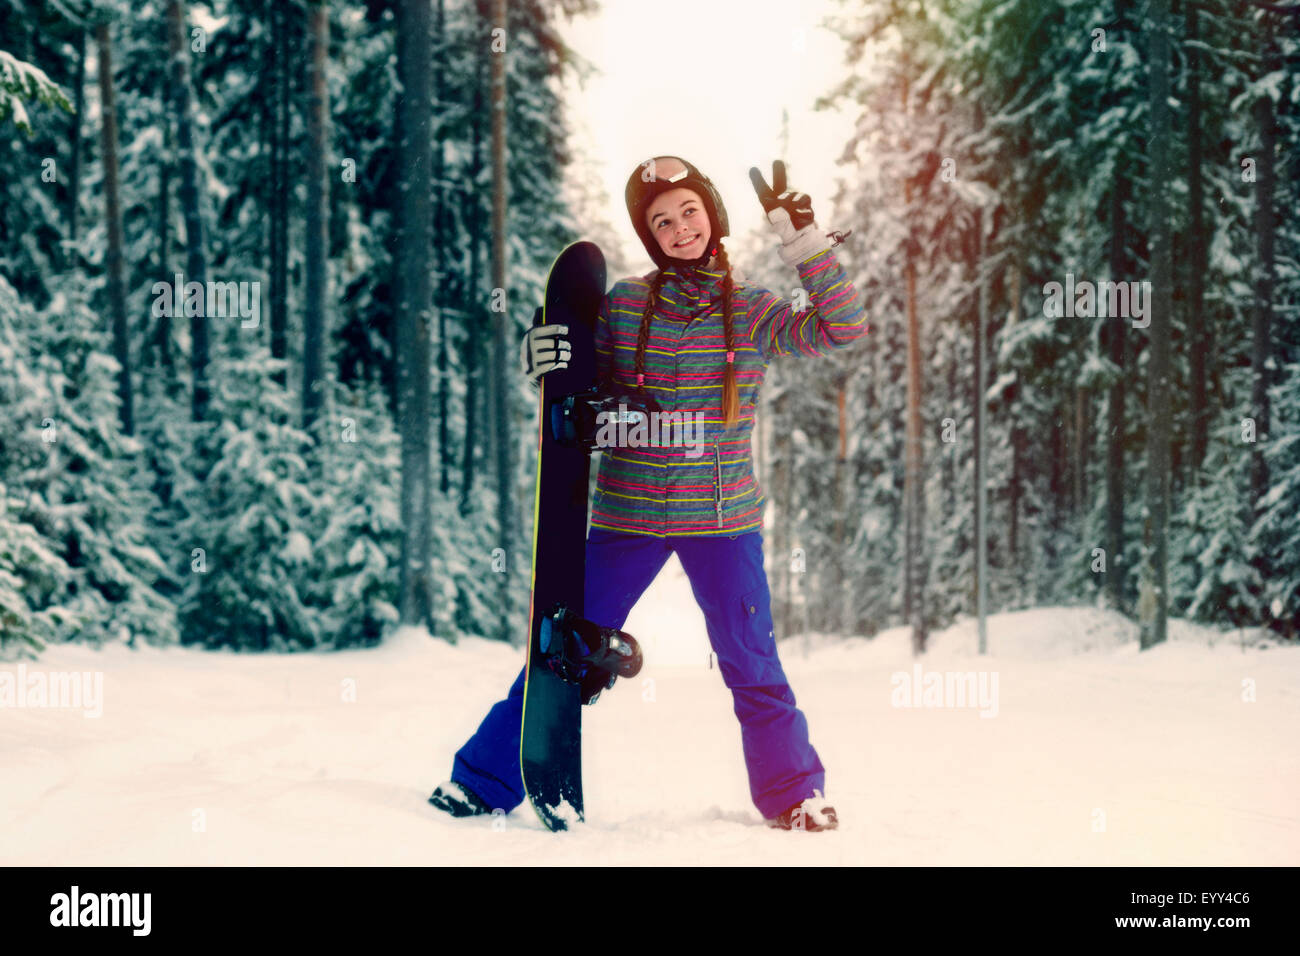 Caucasian snowboarder making peace sign in snowy forest Banque D'Images